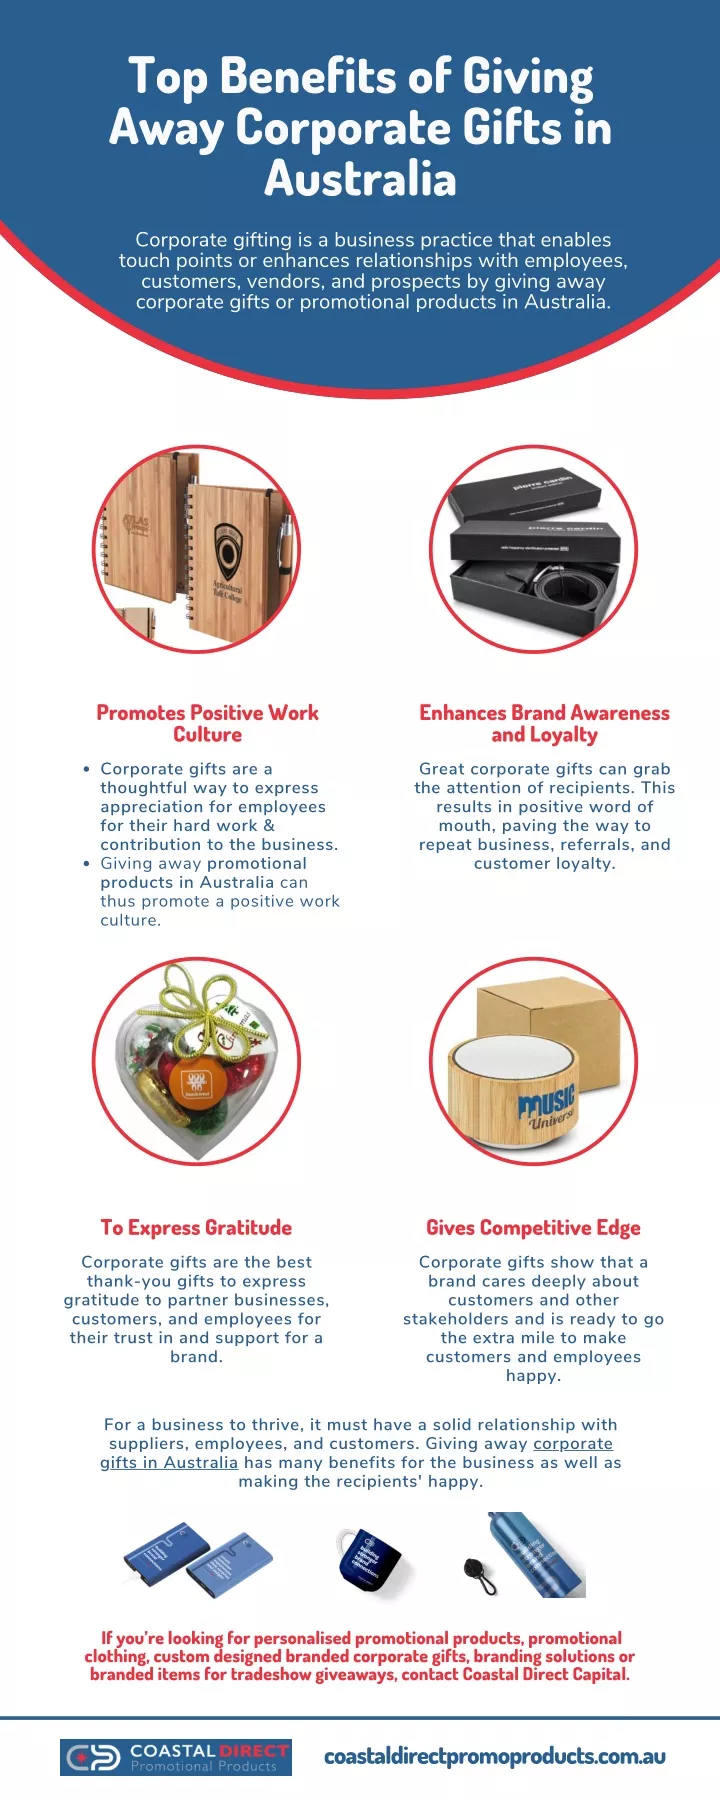 Looking For The Best Corporate Gifts Wholesale Singapore: Here Are Some  Important Tips by EZGift - Customized Corporate Gifts in Singapore - Issuu